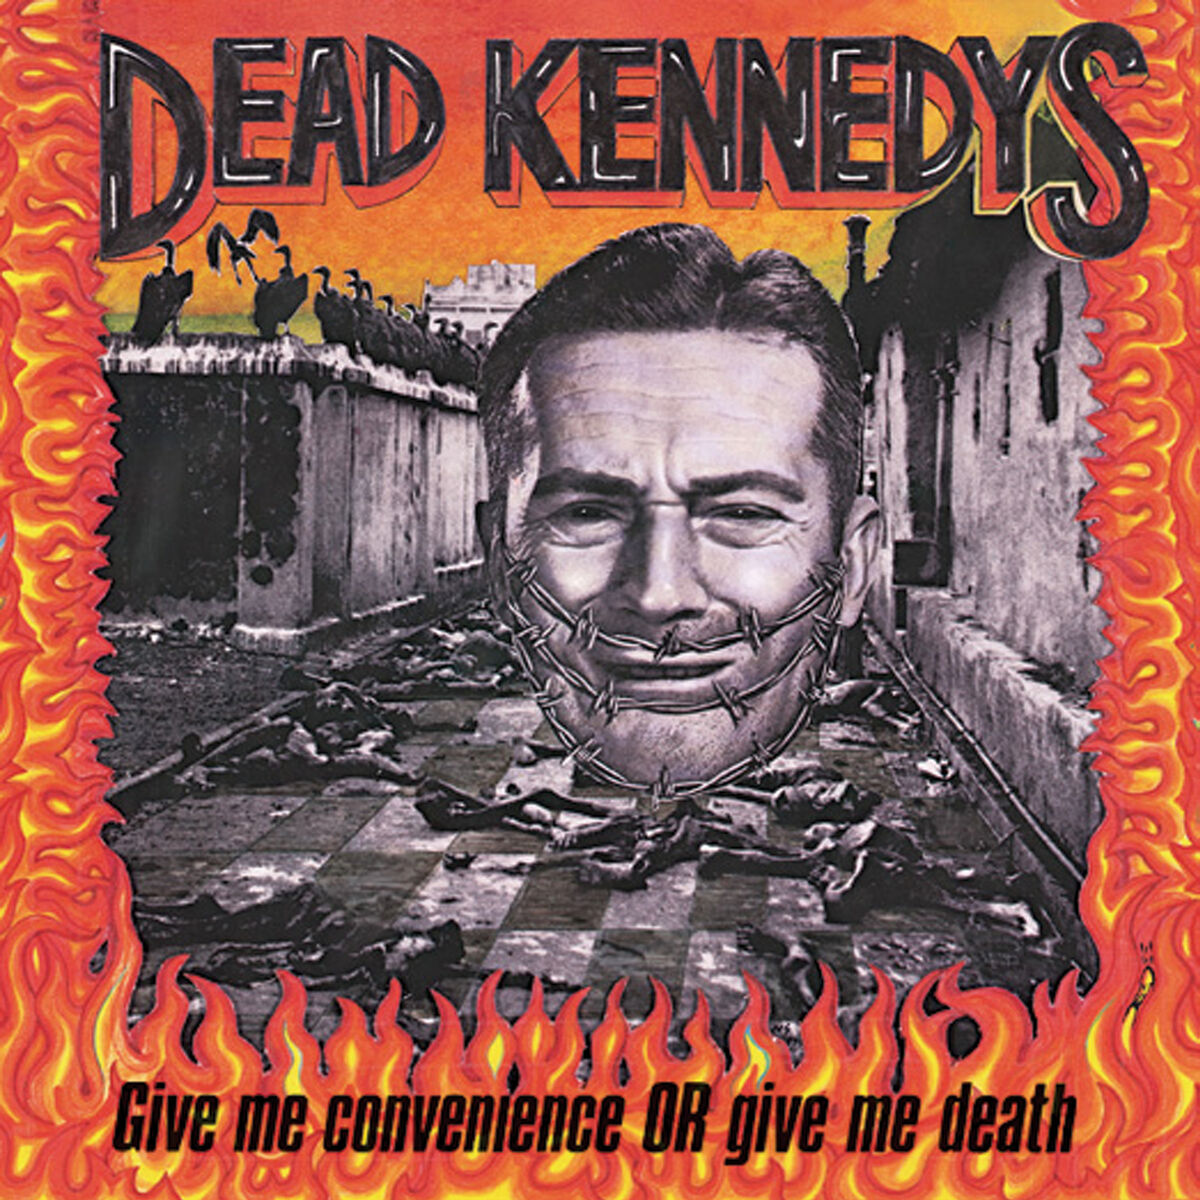 Dead Kennedys - Give Me Convenience or Give Me Death: lyrics and 